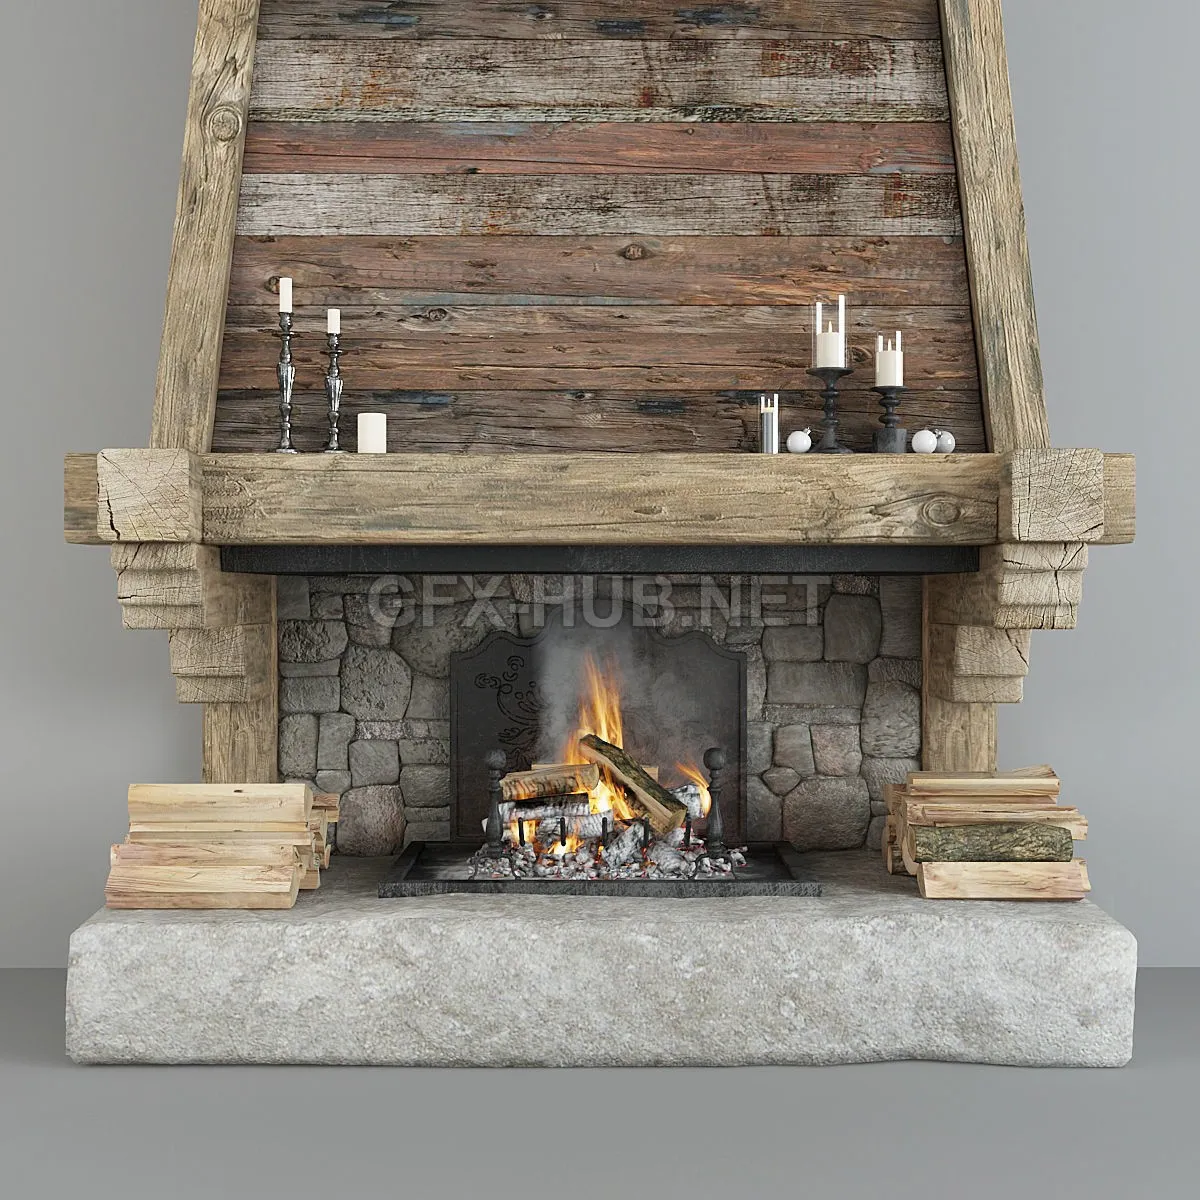 FURNITURE 3D MODELS – Fireplace and decor